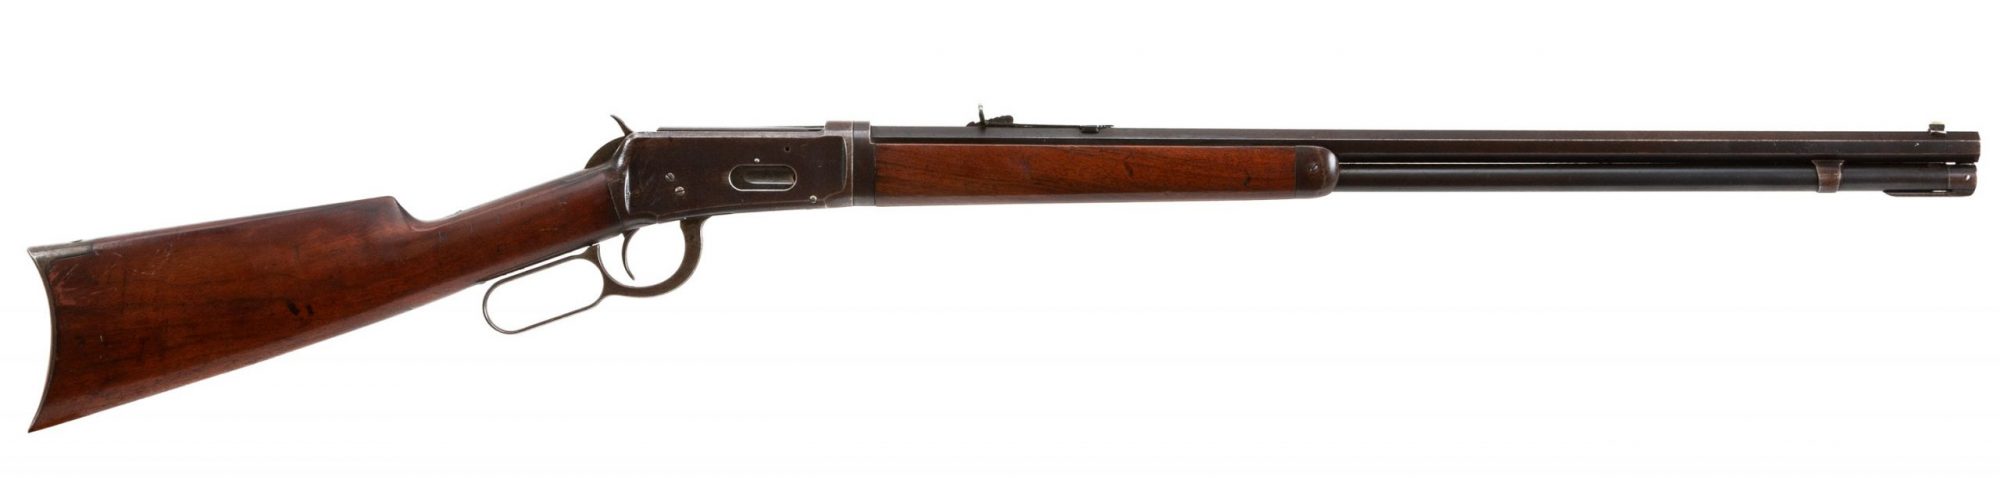 Photo of an antique Winchester 1894 from 1895, for sale by Turnbull Restoration of Bloomfield, NY